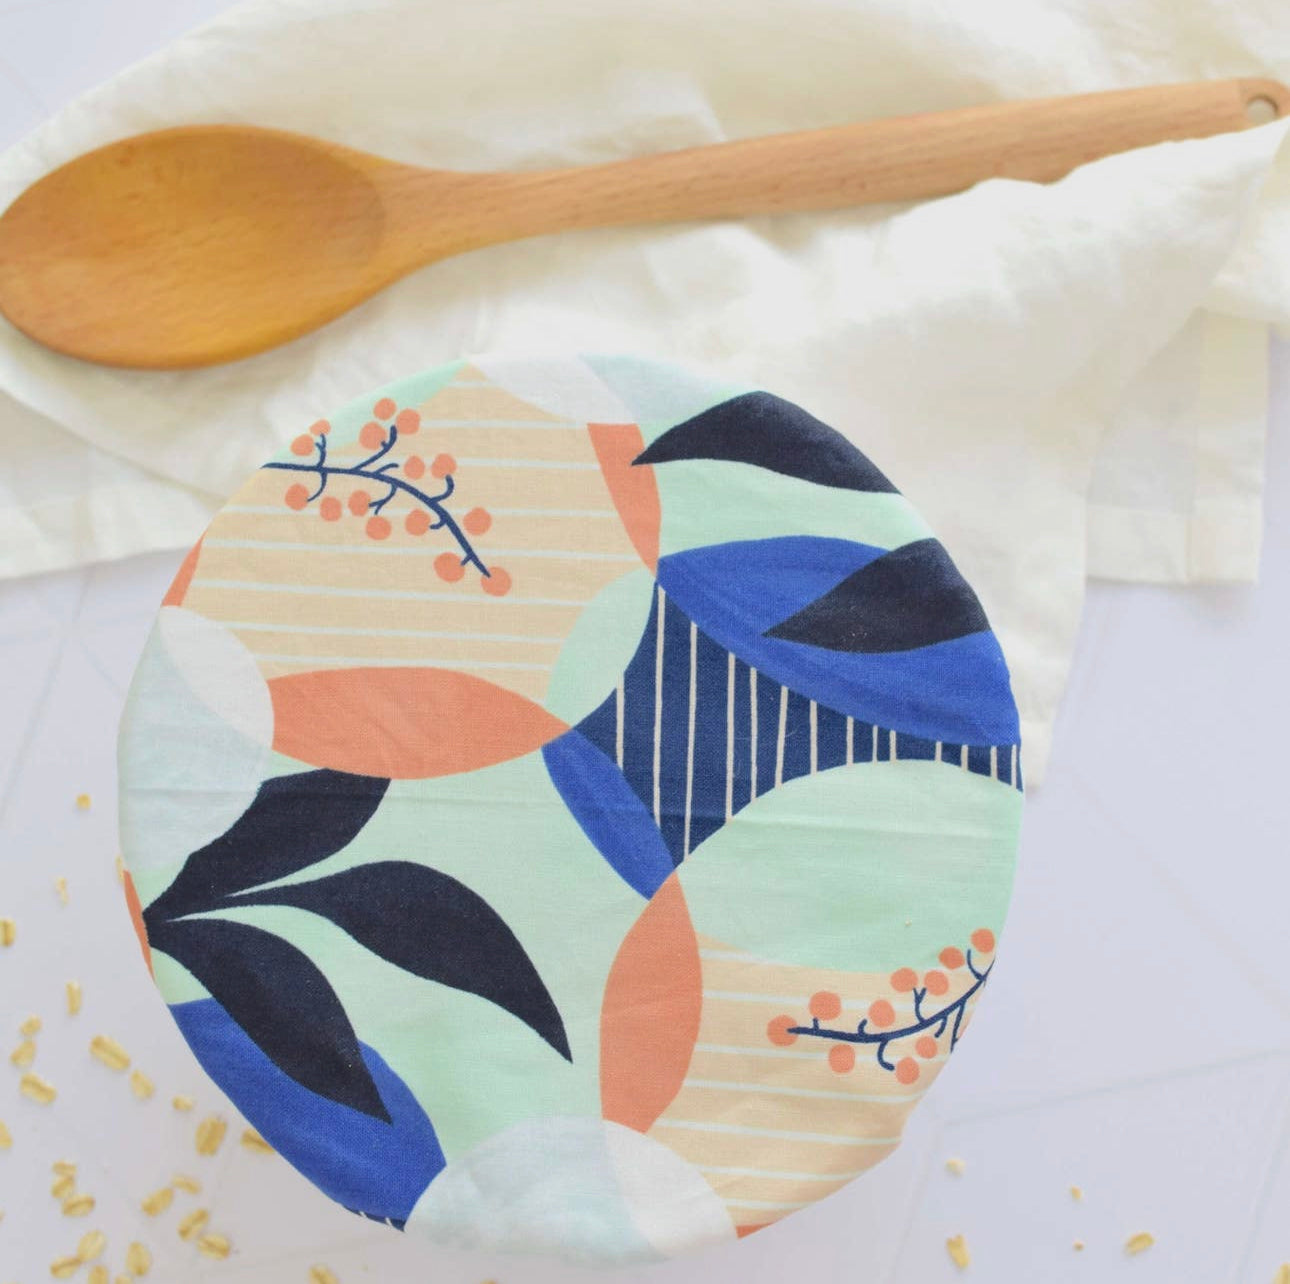 Wild Clementine Co. Reusable Bowl Covers Collection